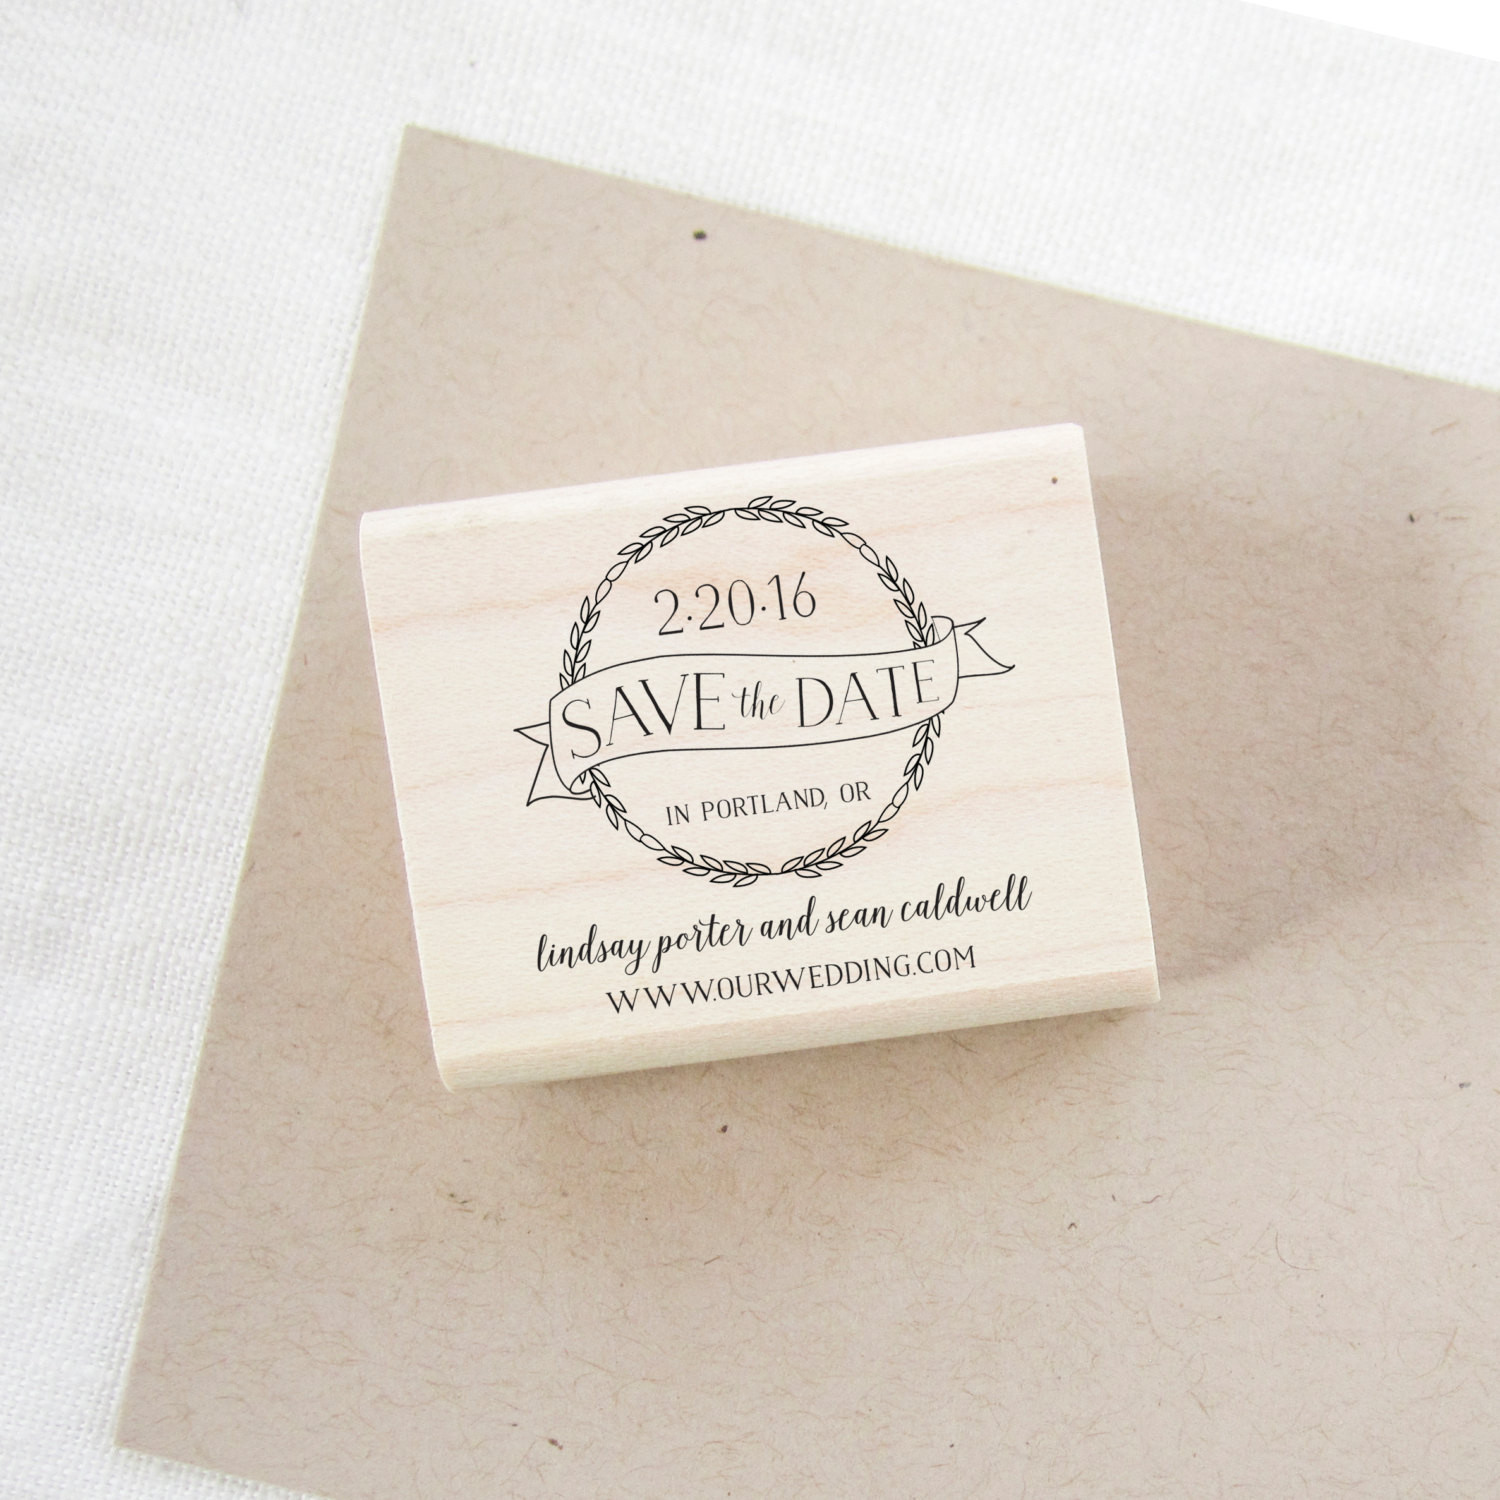 Postage Stamps For Wedding Invitations
 Save the Date Stamp wedding invitation stamp by sushistamps